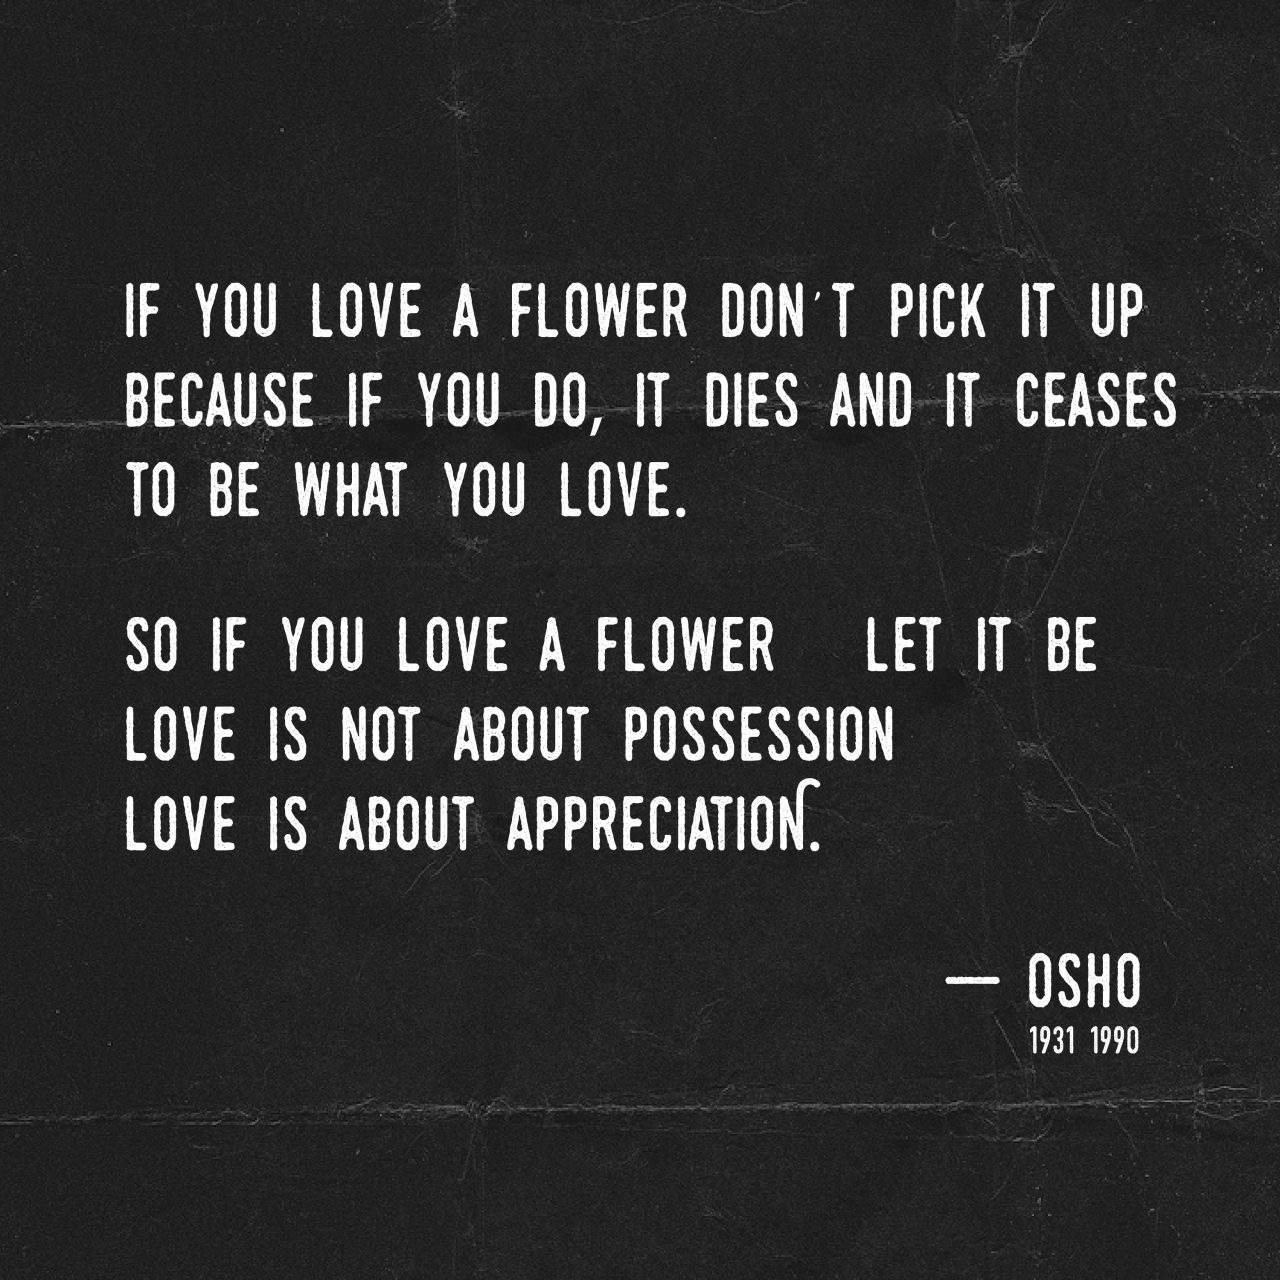 osho osho quotes quotes love flower